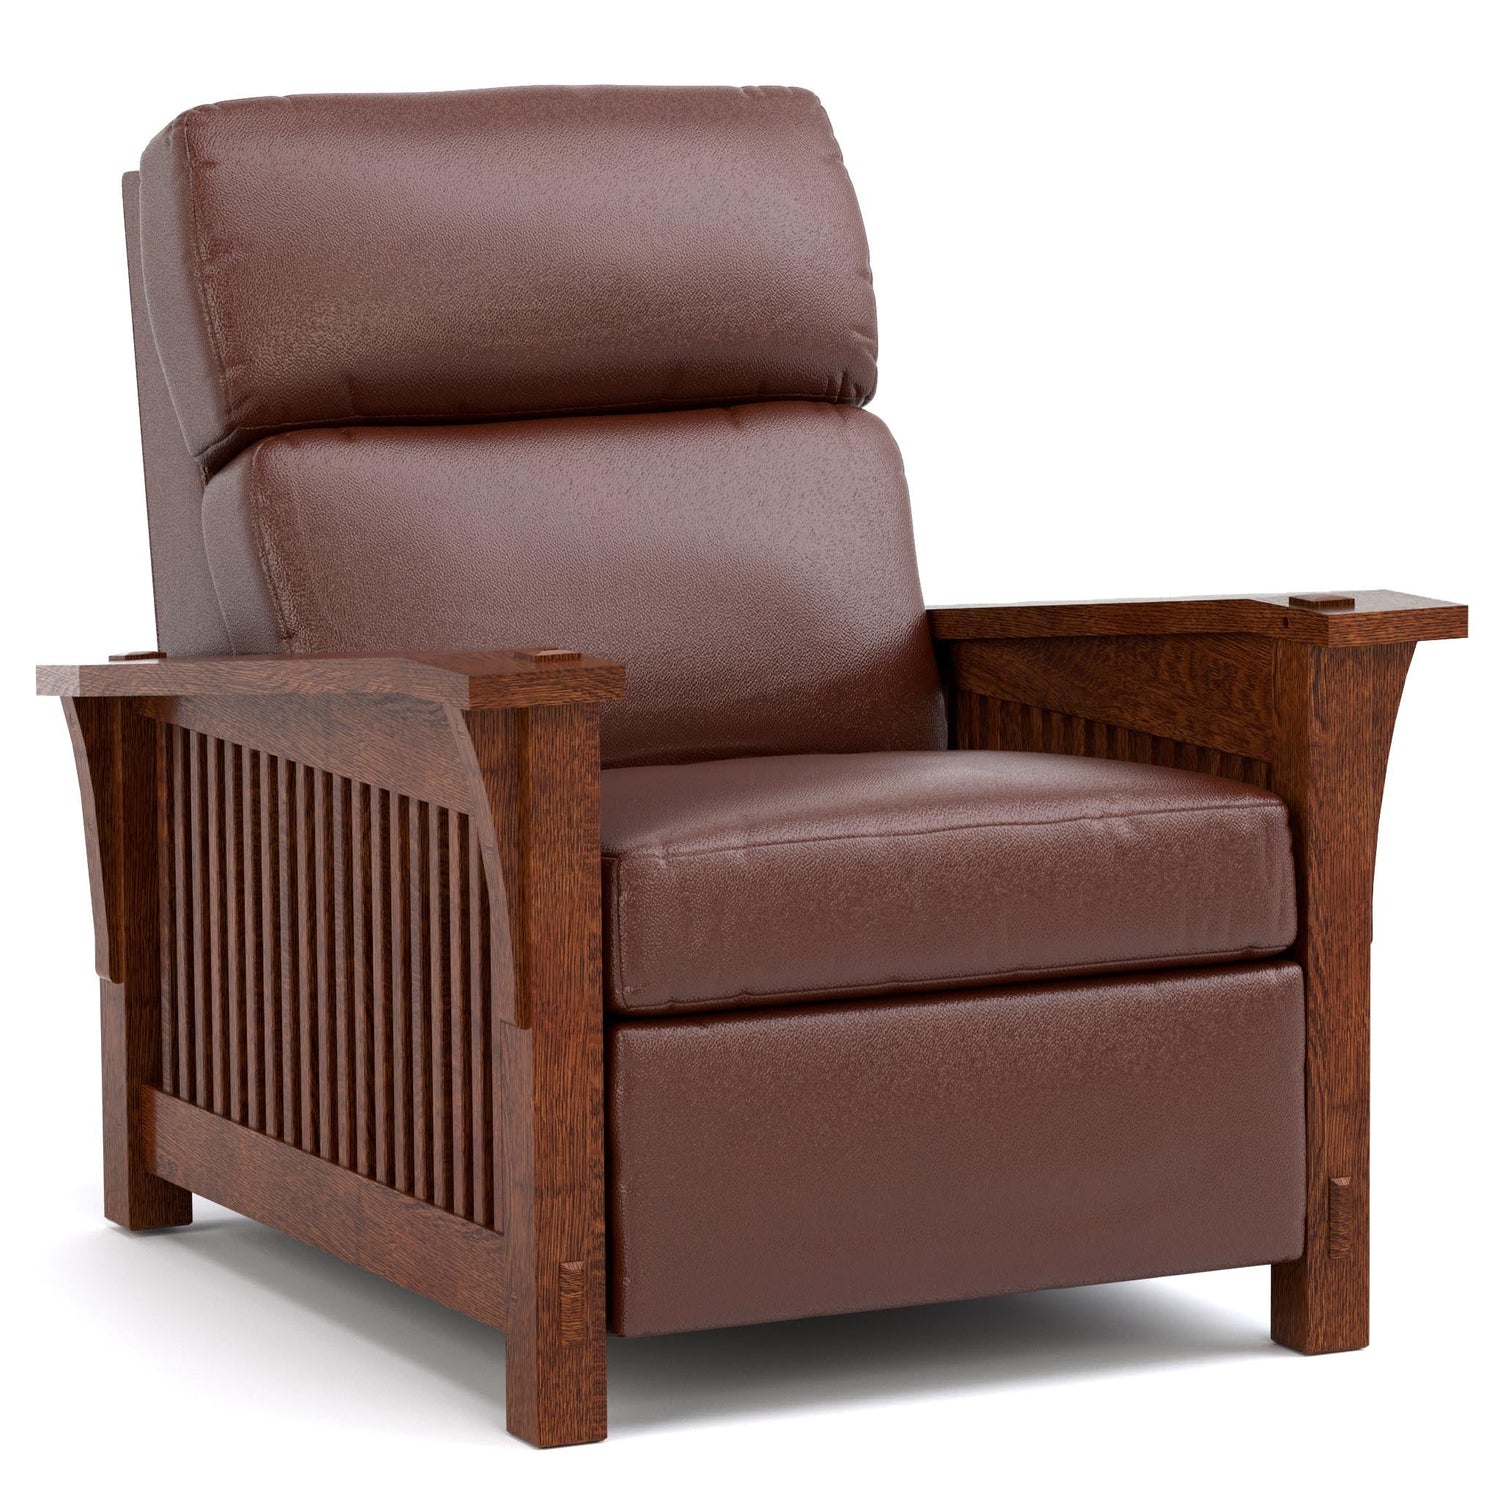 Spindle Morris Power Wall Recliner Colman Sienna Leather 032 - Onondaga Finish